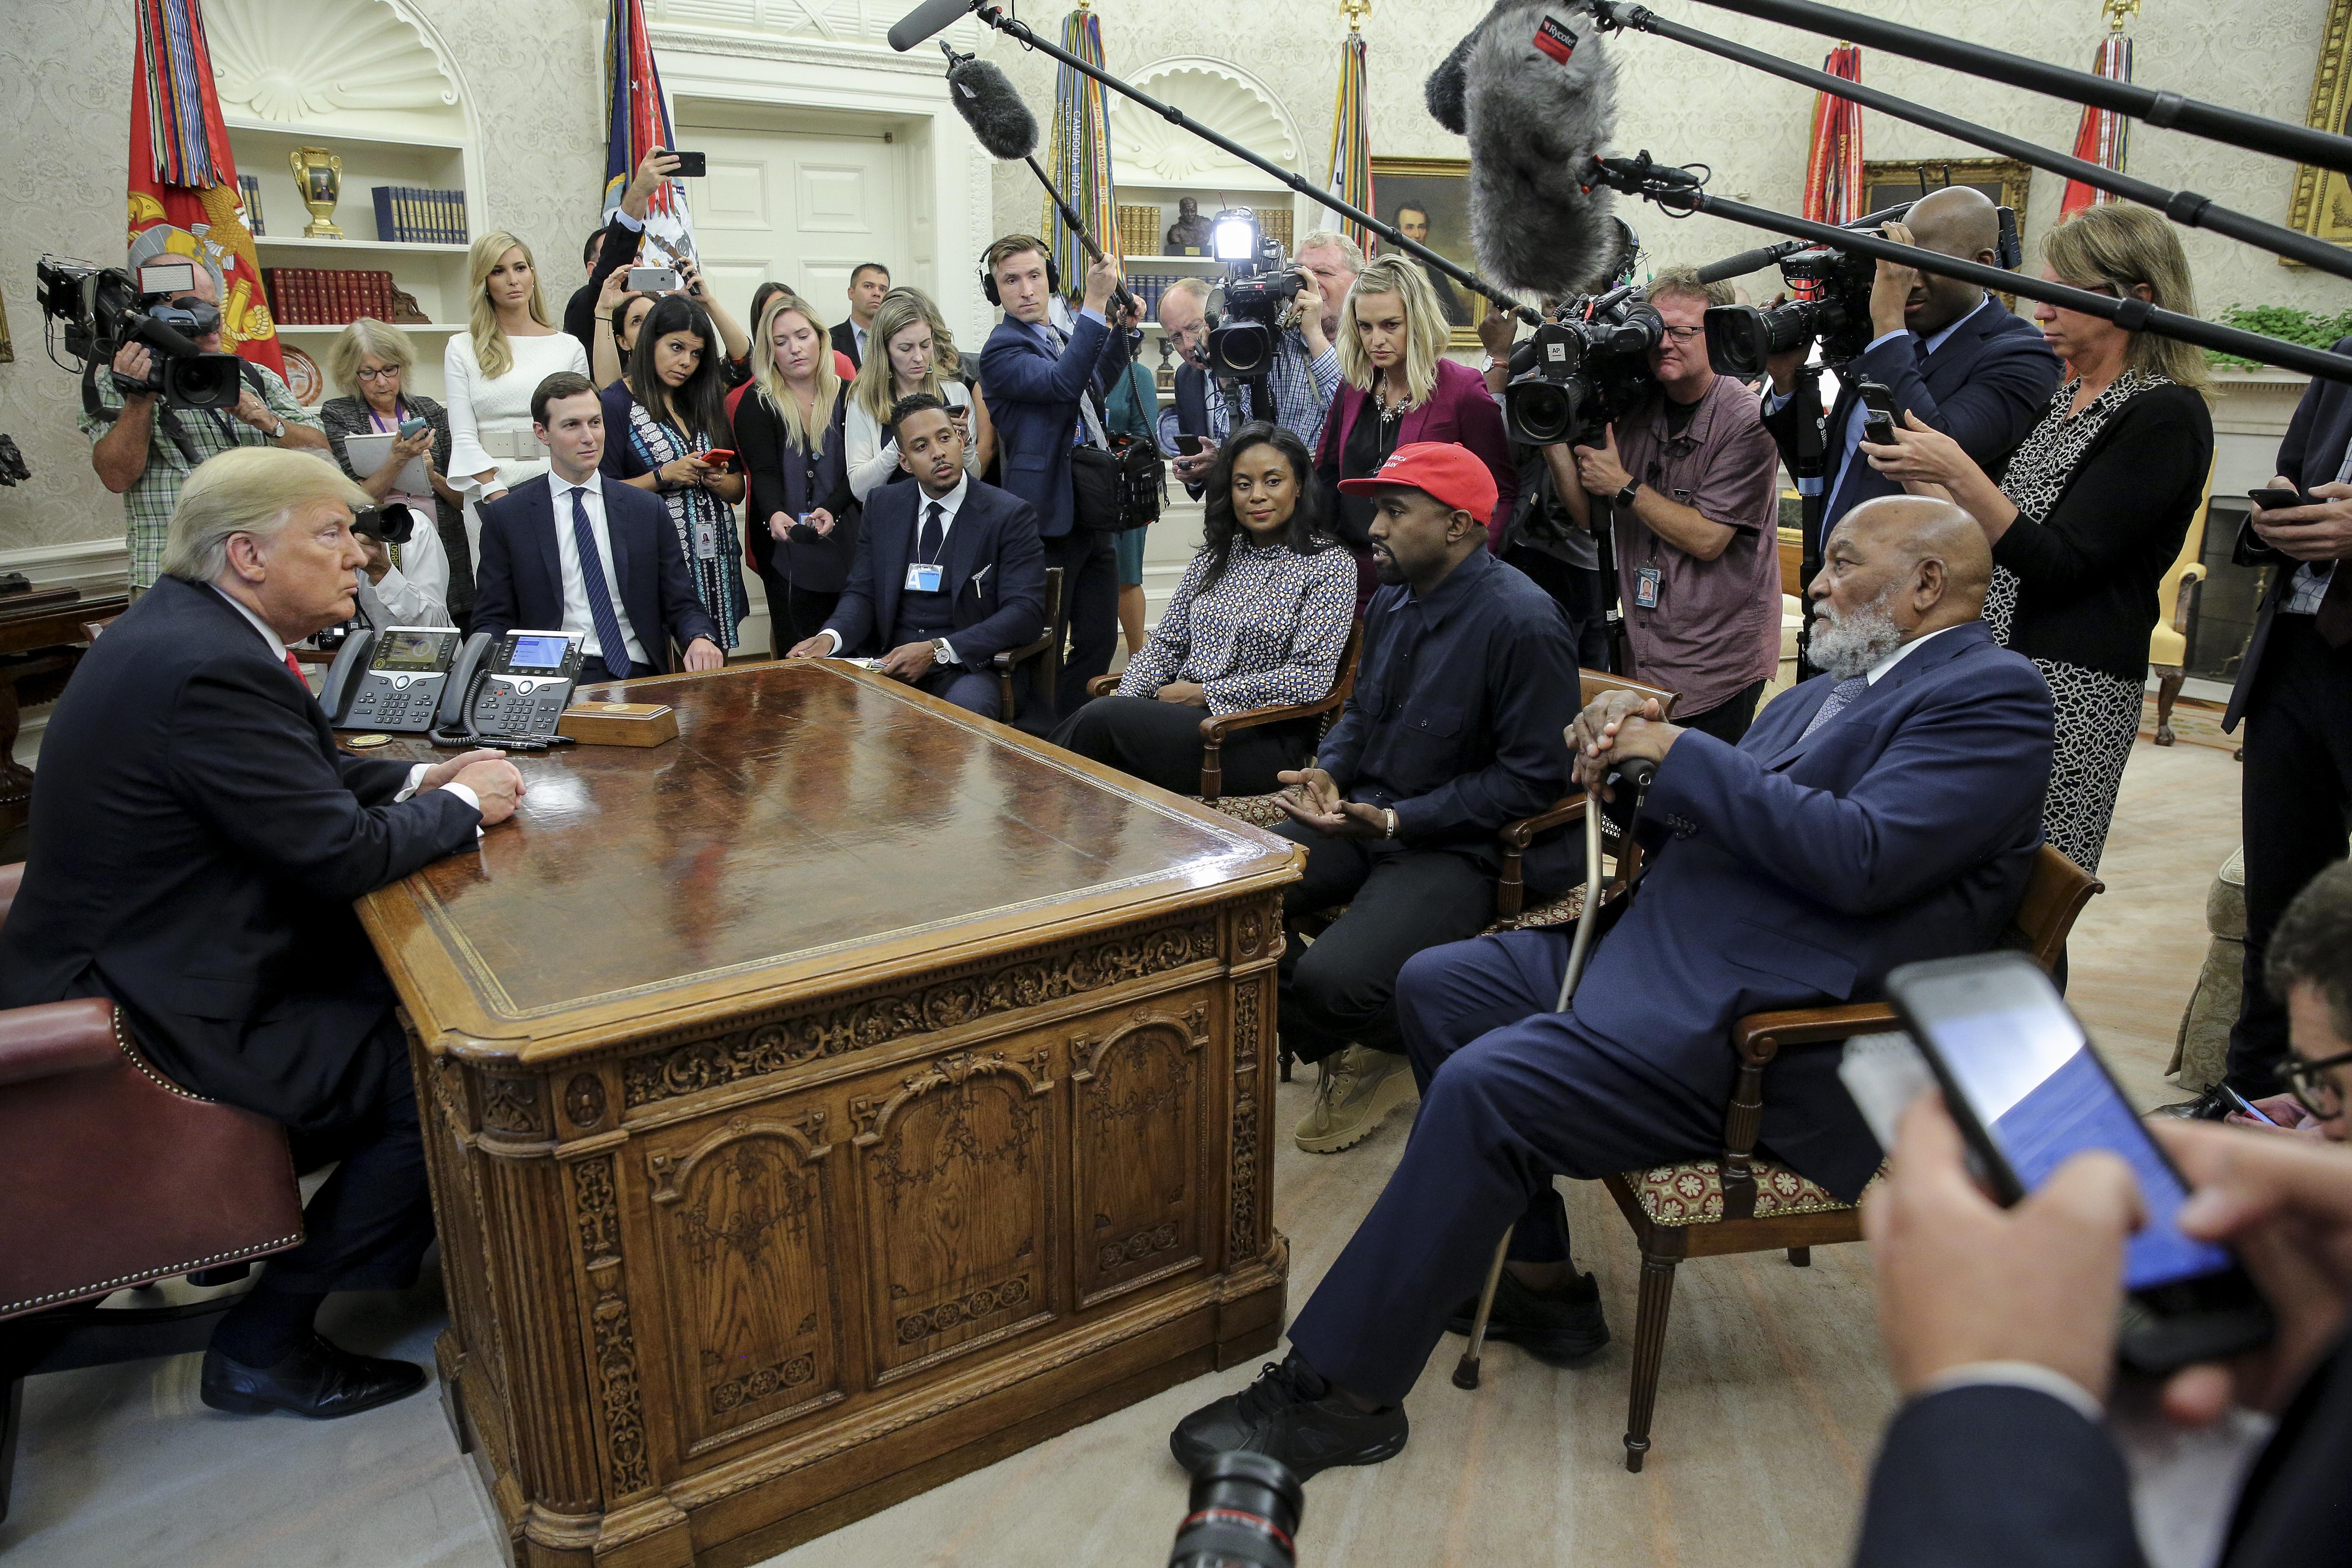 Rapper Kanye West, second right, flanked by NFL Hall of Famer Jim Brown, right, speaks during a meeting with President Donald Trump, left, in the Oval office of the White House on October 11, 2018 in Washington, DC. Next to Trump, Ivanka Trump and Senior Advisor to the President, Jared Kushner.